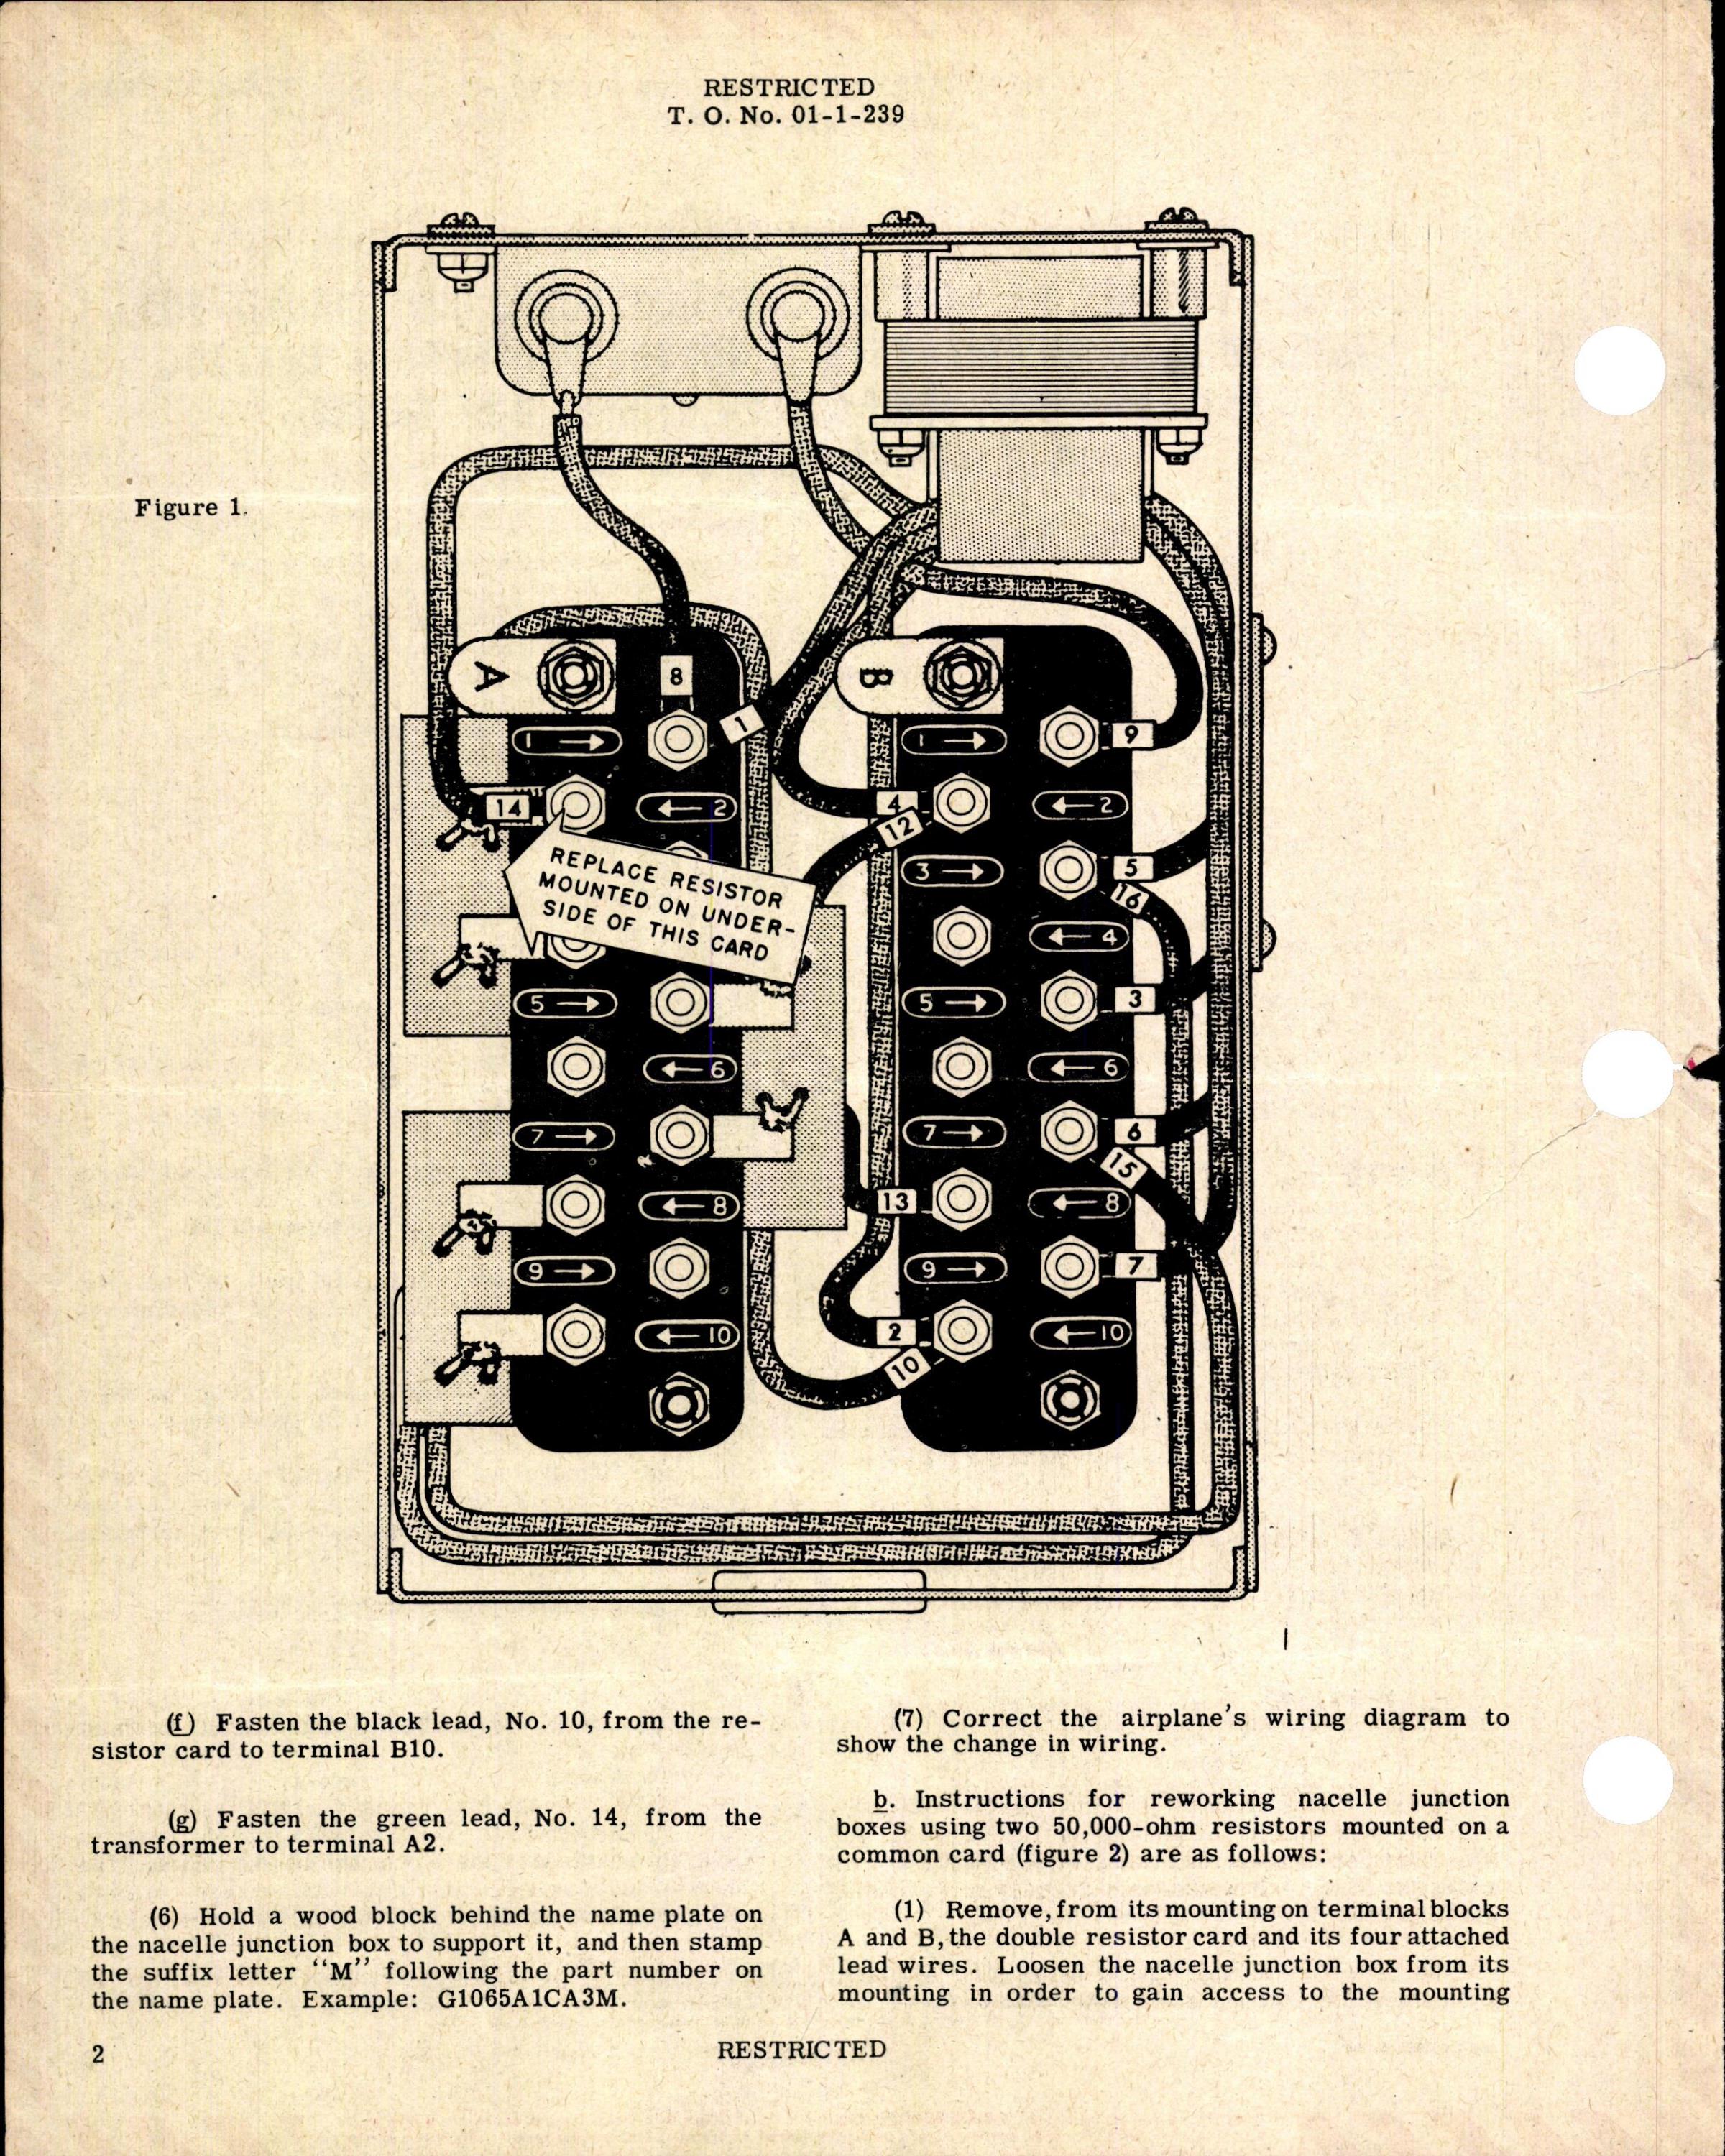 Sample page 2 from AirCorps Library document: Rework of Nacelle Junction Boxes and Circuit for Type B Turbosupercharger Control Systems